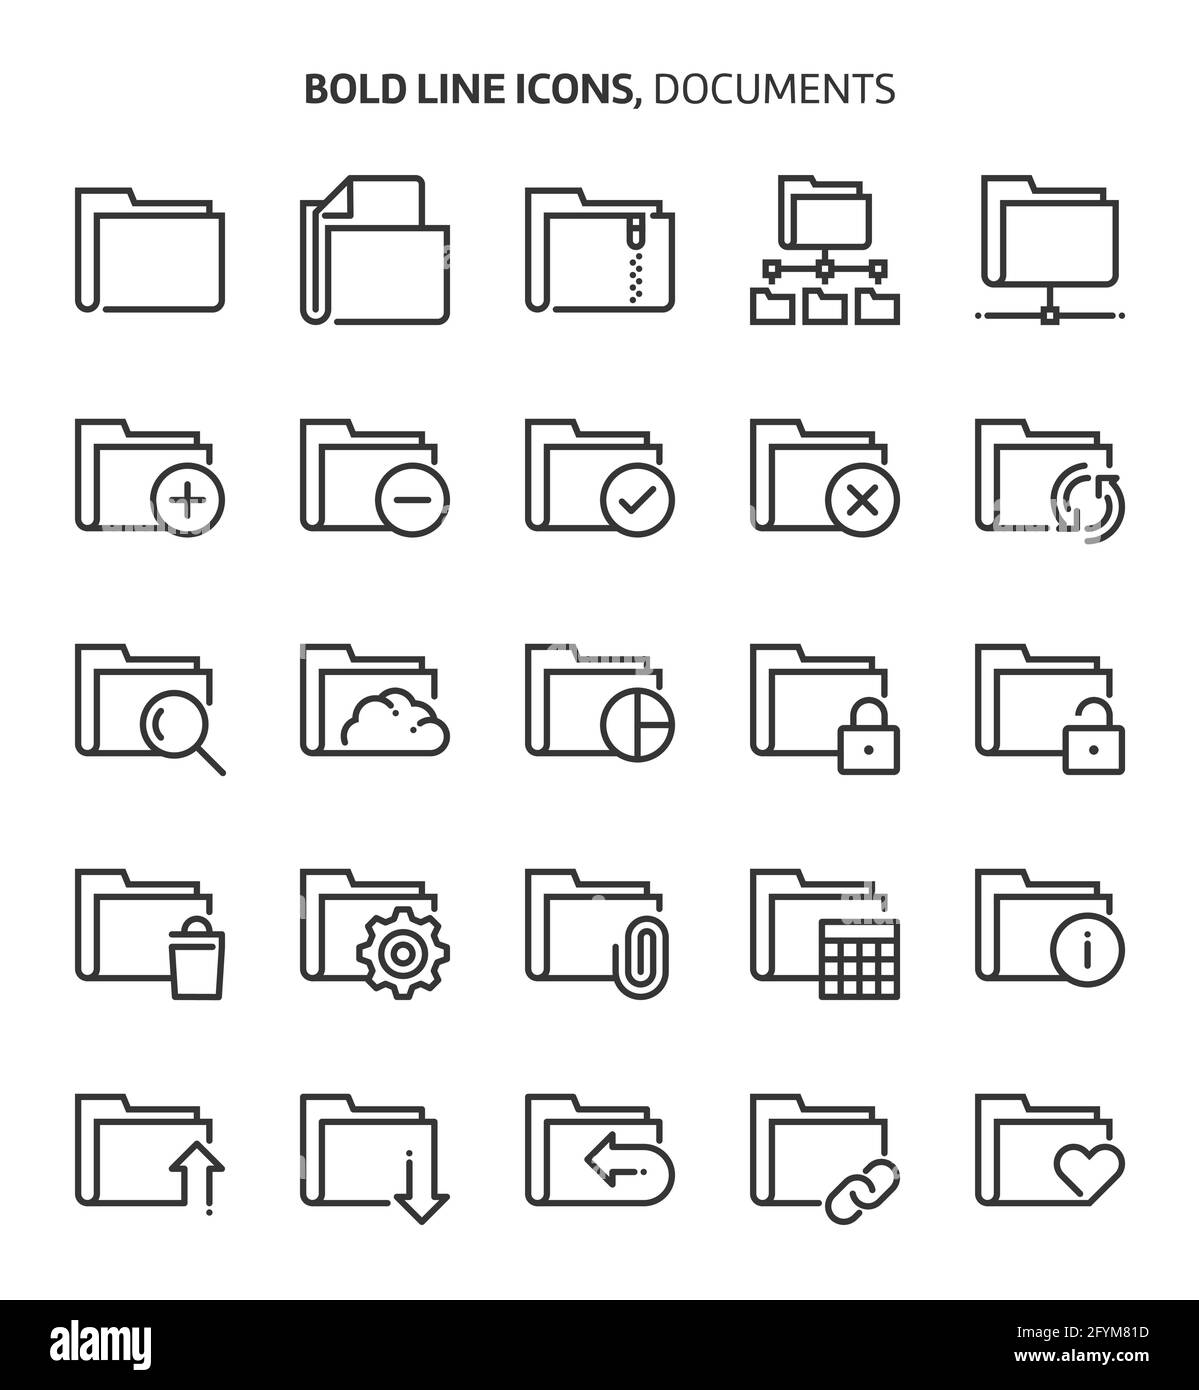 Folders, bold line icons. The illustrations are a vector, editable stroke, 48x48 pixel perfect files. Crafted with precision and eye for quality. Stock Vector